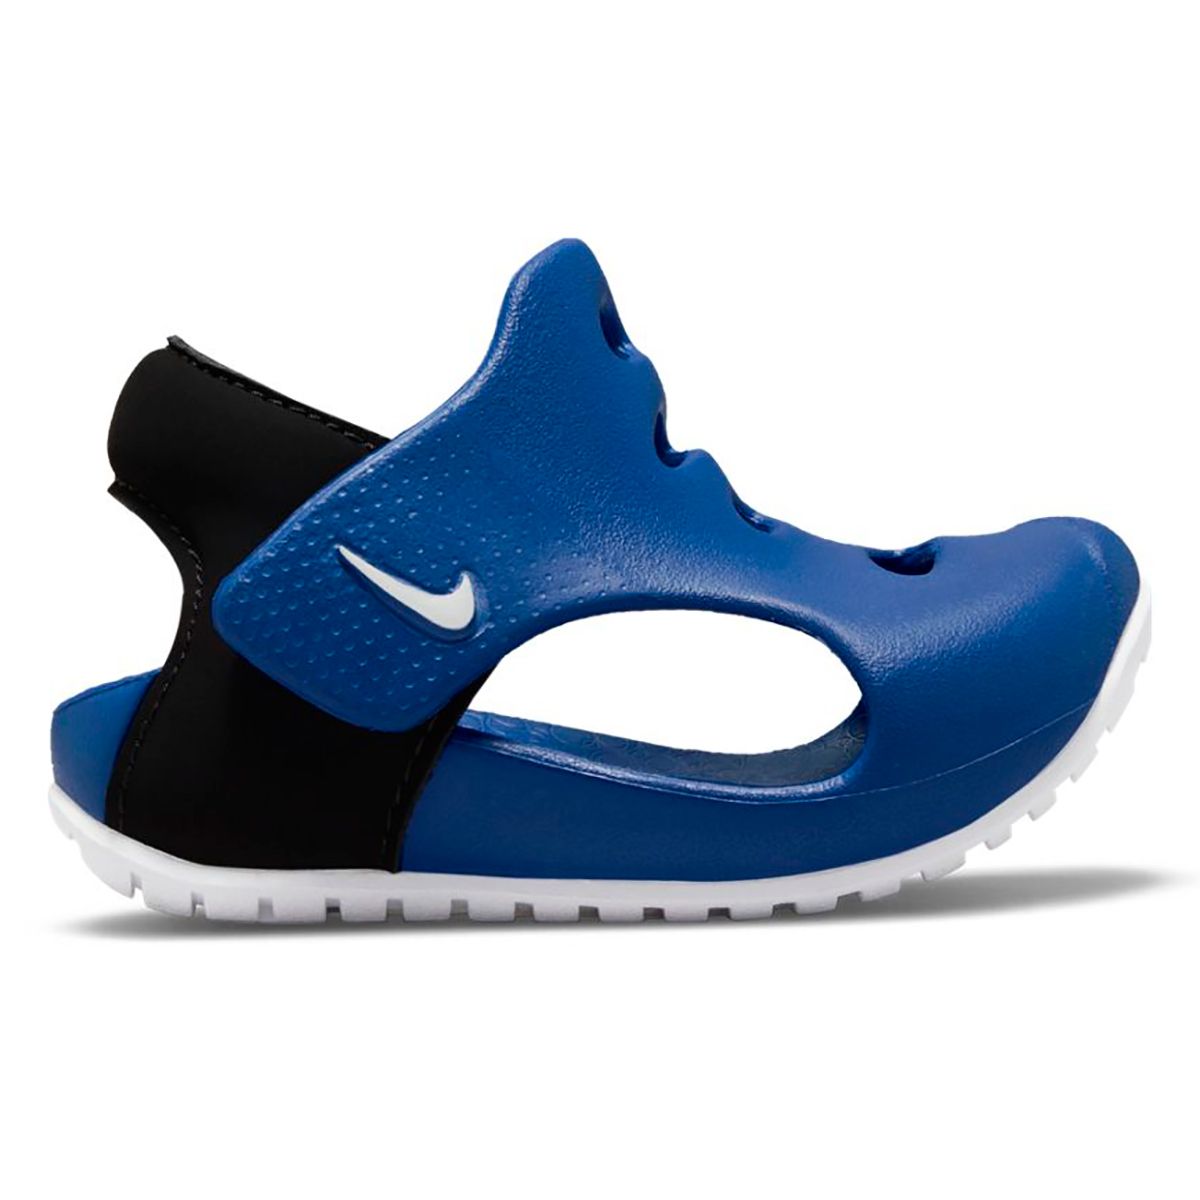 Nike Sunray 3 Toddler DH9465-400 Sandals Protect